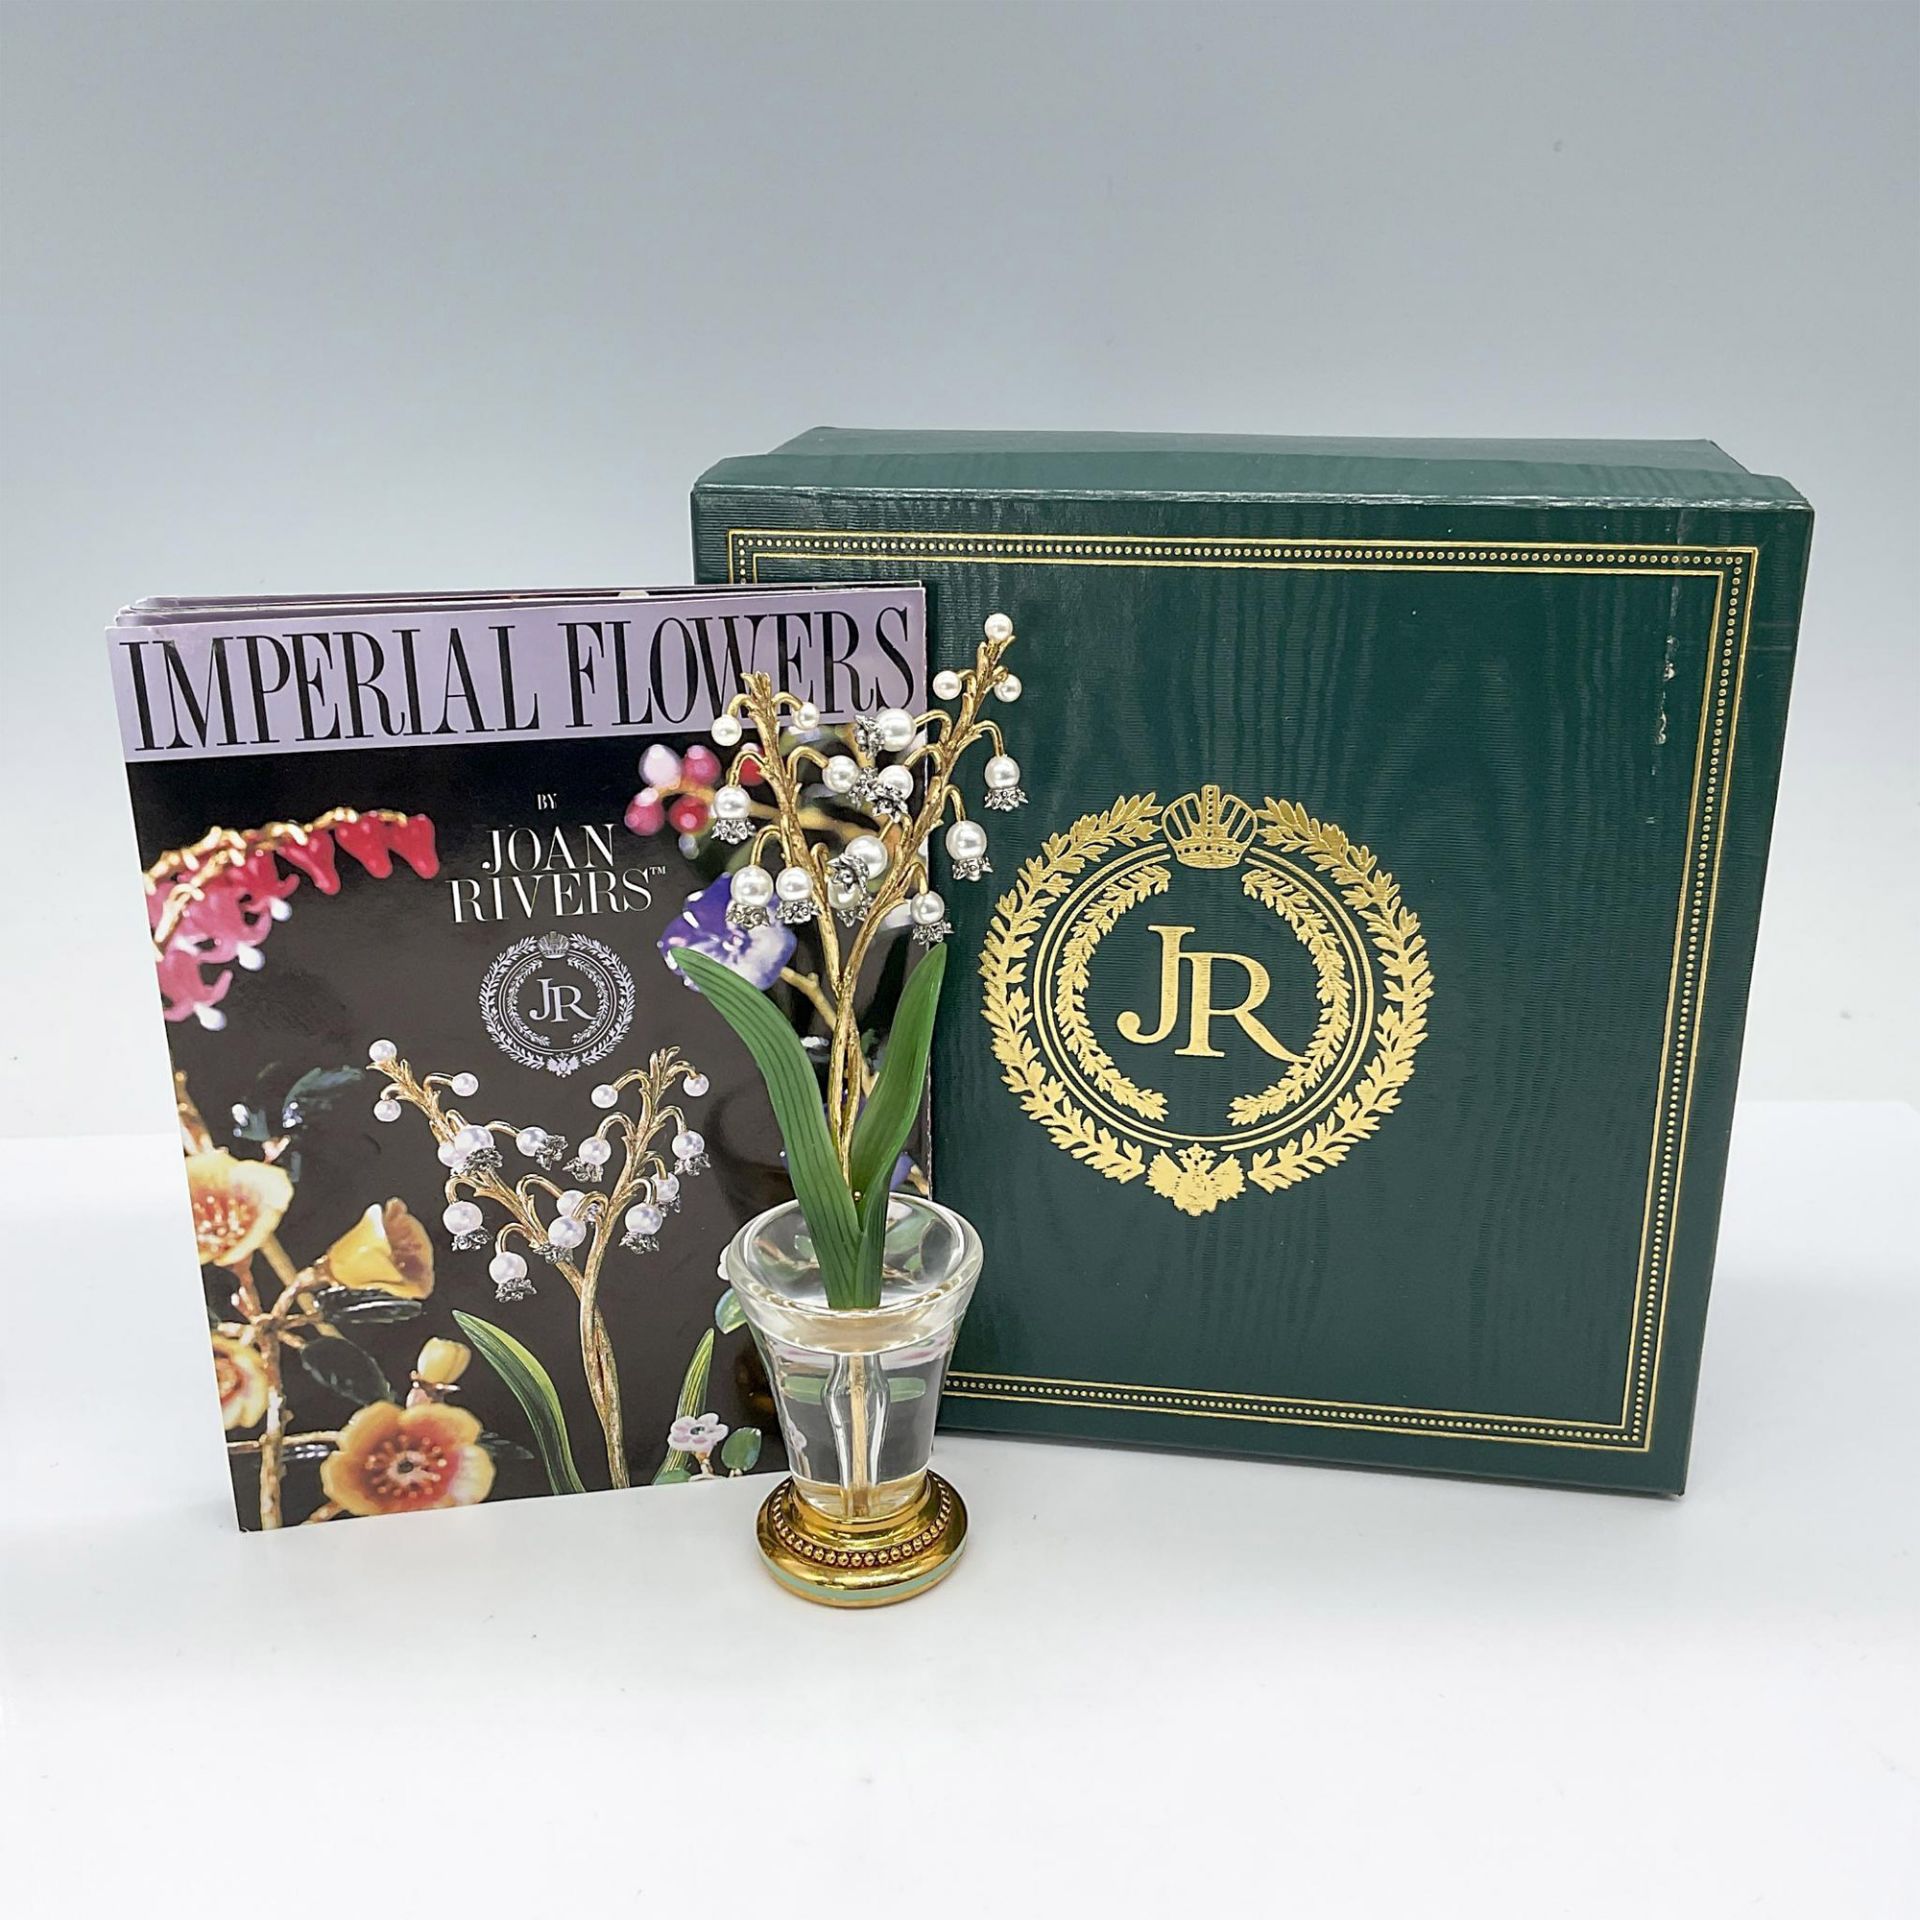 Imperial Flowers by Joan Rivers, Lily of the Valley - Image 4 of 4